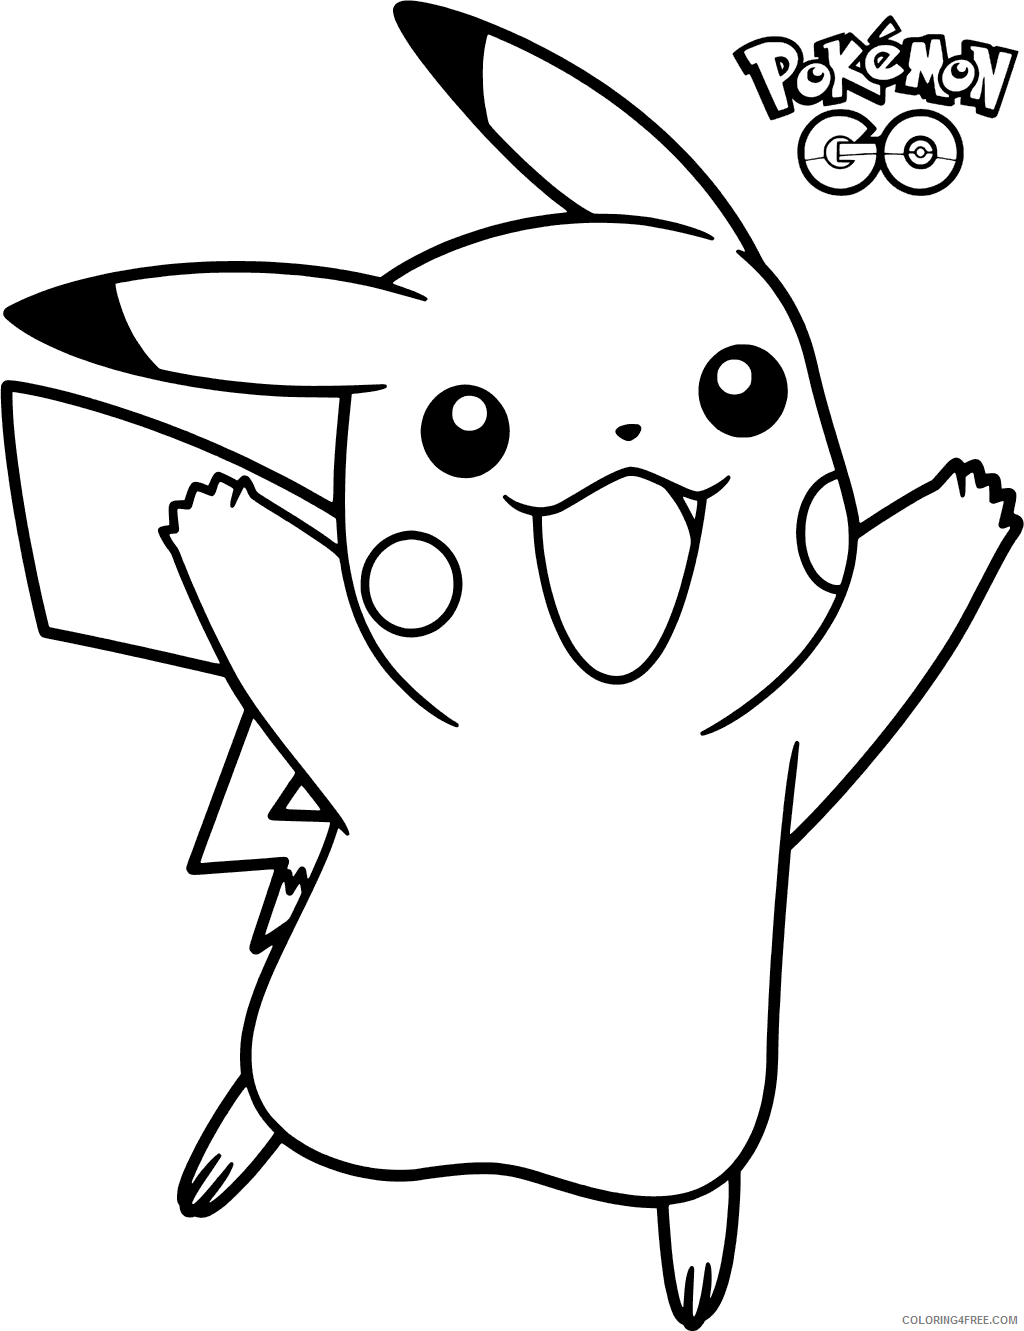 Pokemon Go Coloring Pages Games Pokemon Go Pikachu Printable 2021 0931 Coloring4free